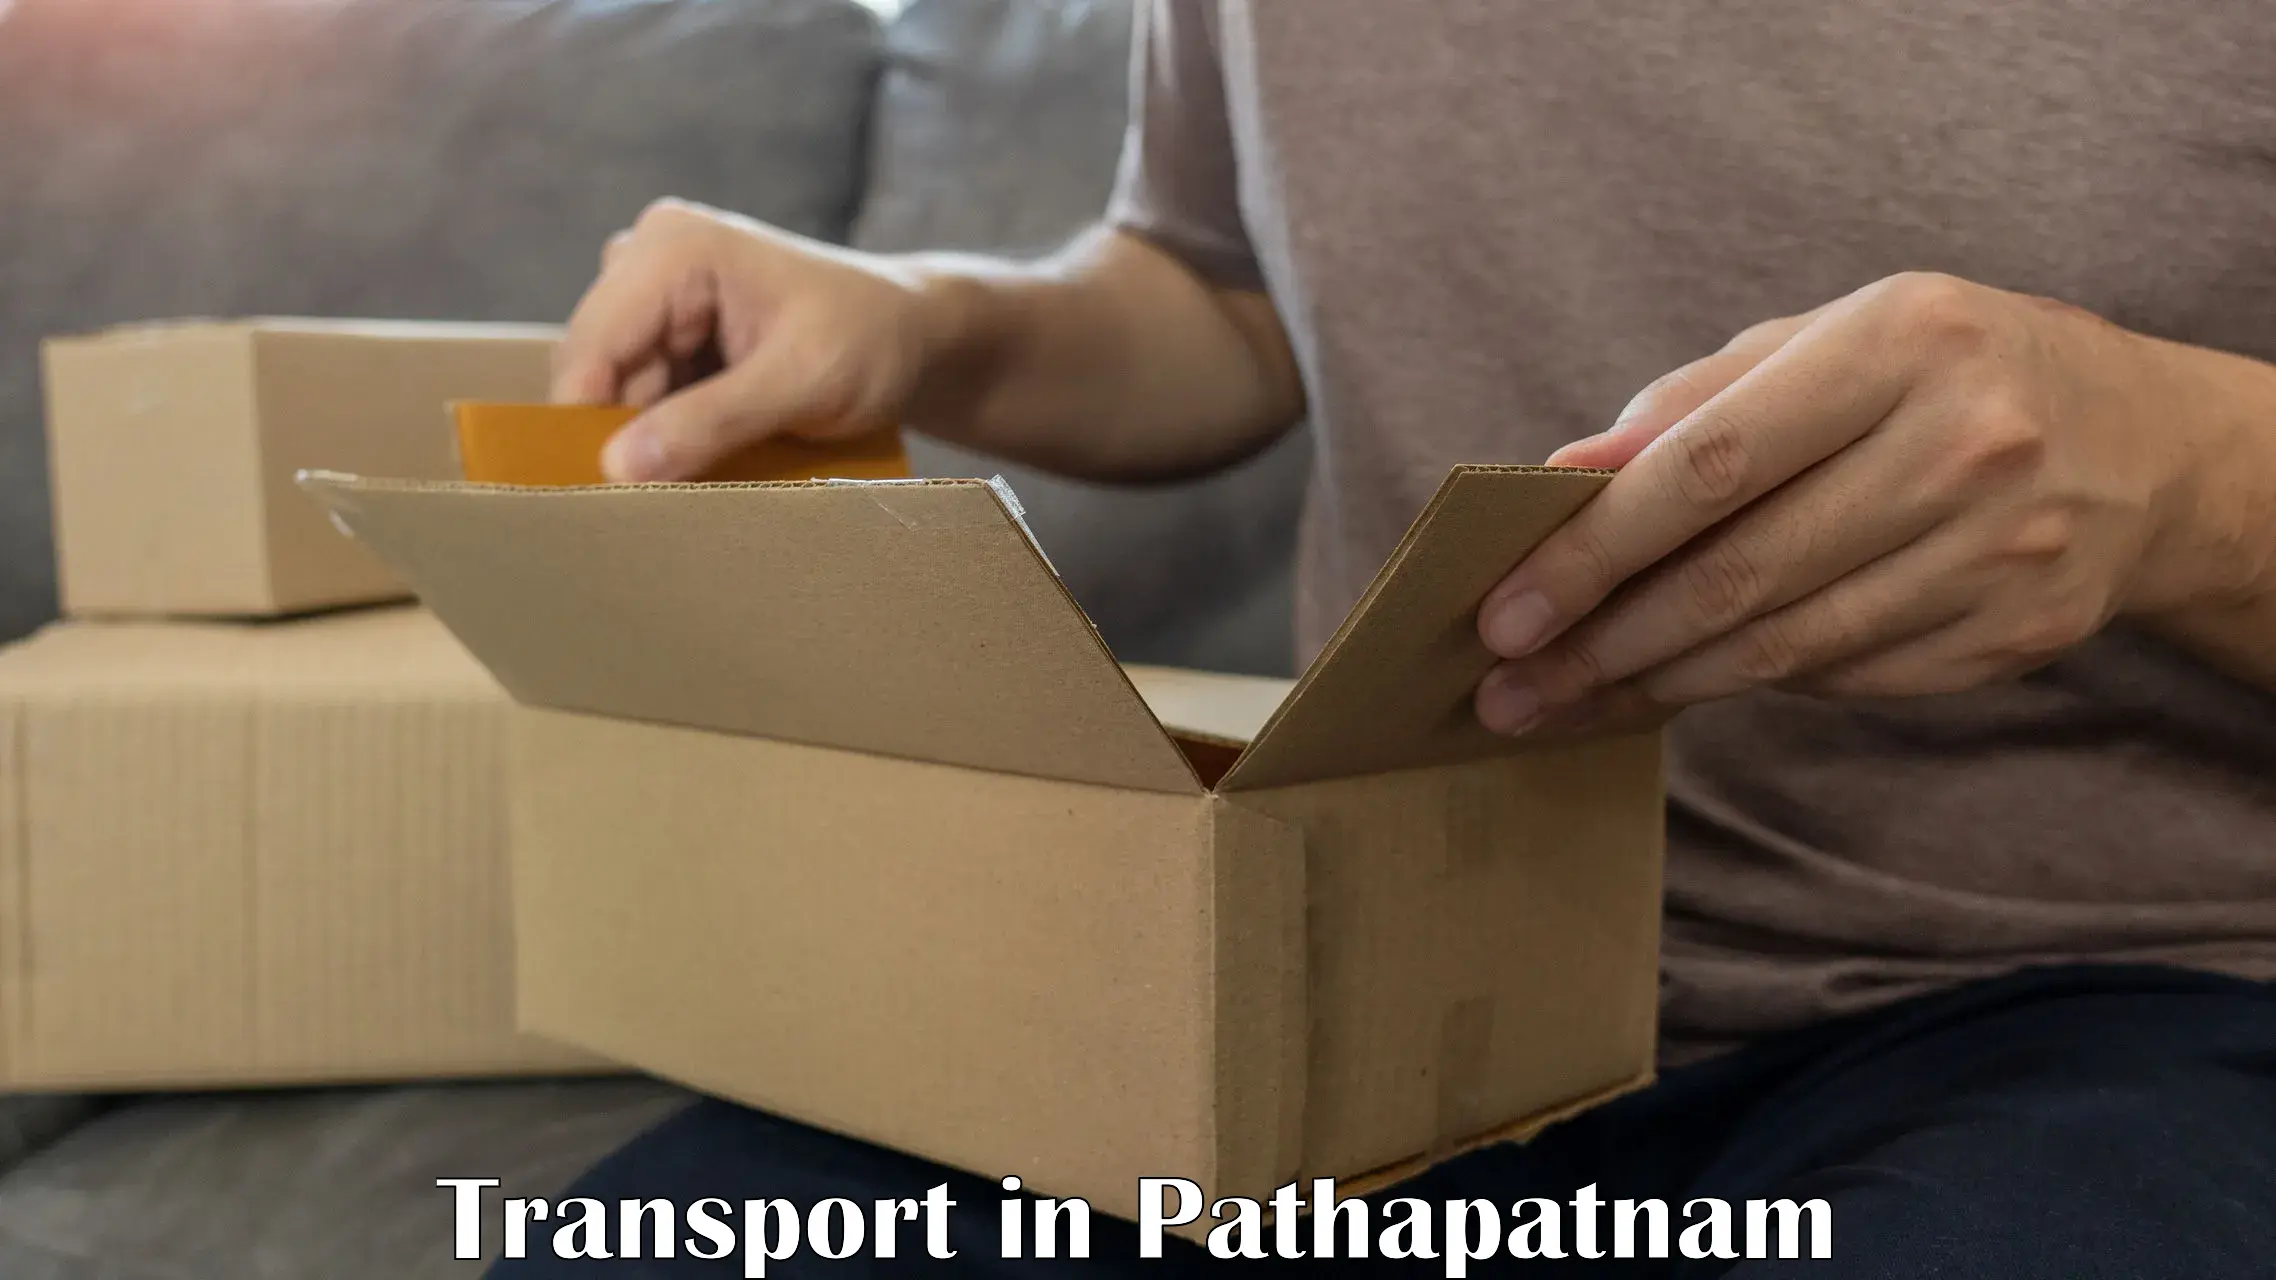 Nationwide transport services in Pathapatnam